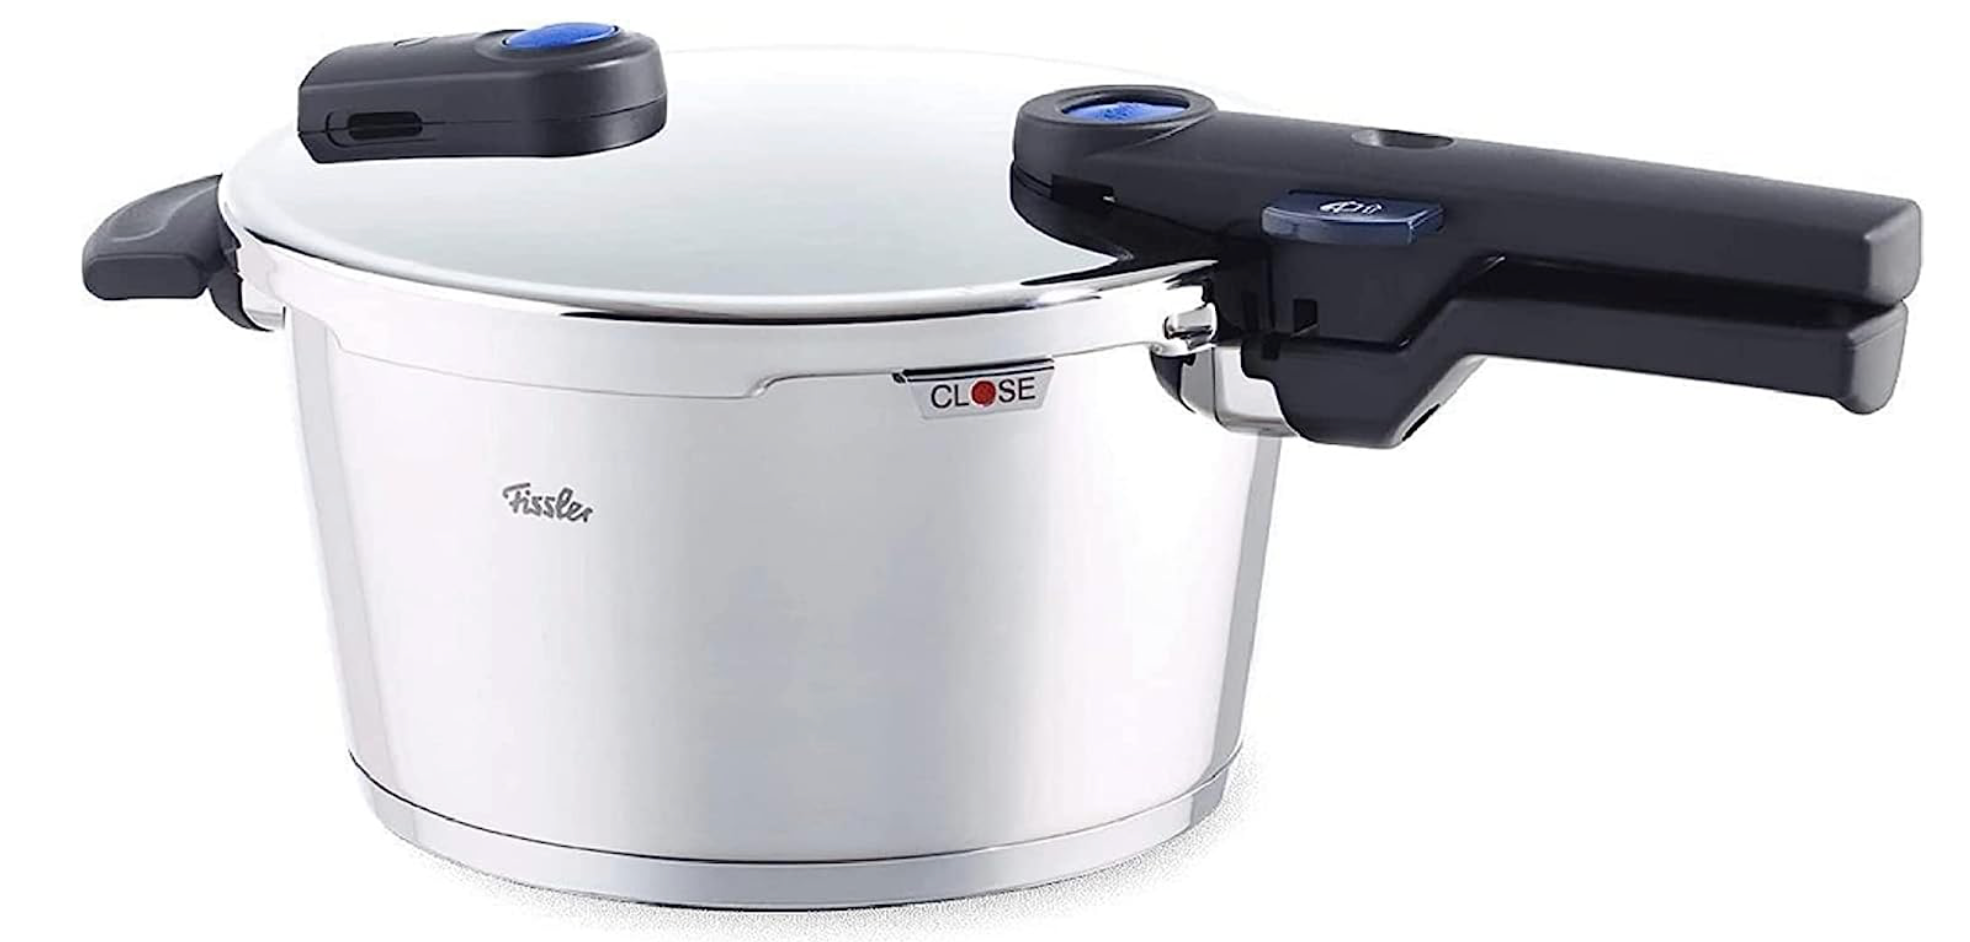 German made. Stainless steel Fissler $239 https://amzn.to/3XD3X01